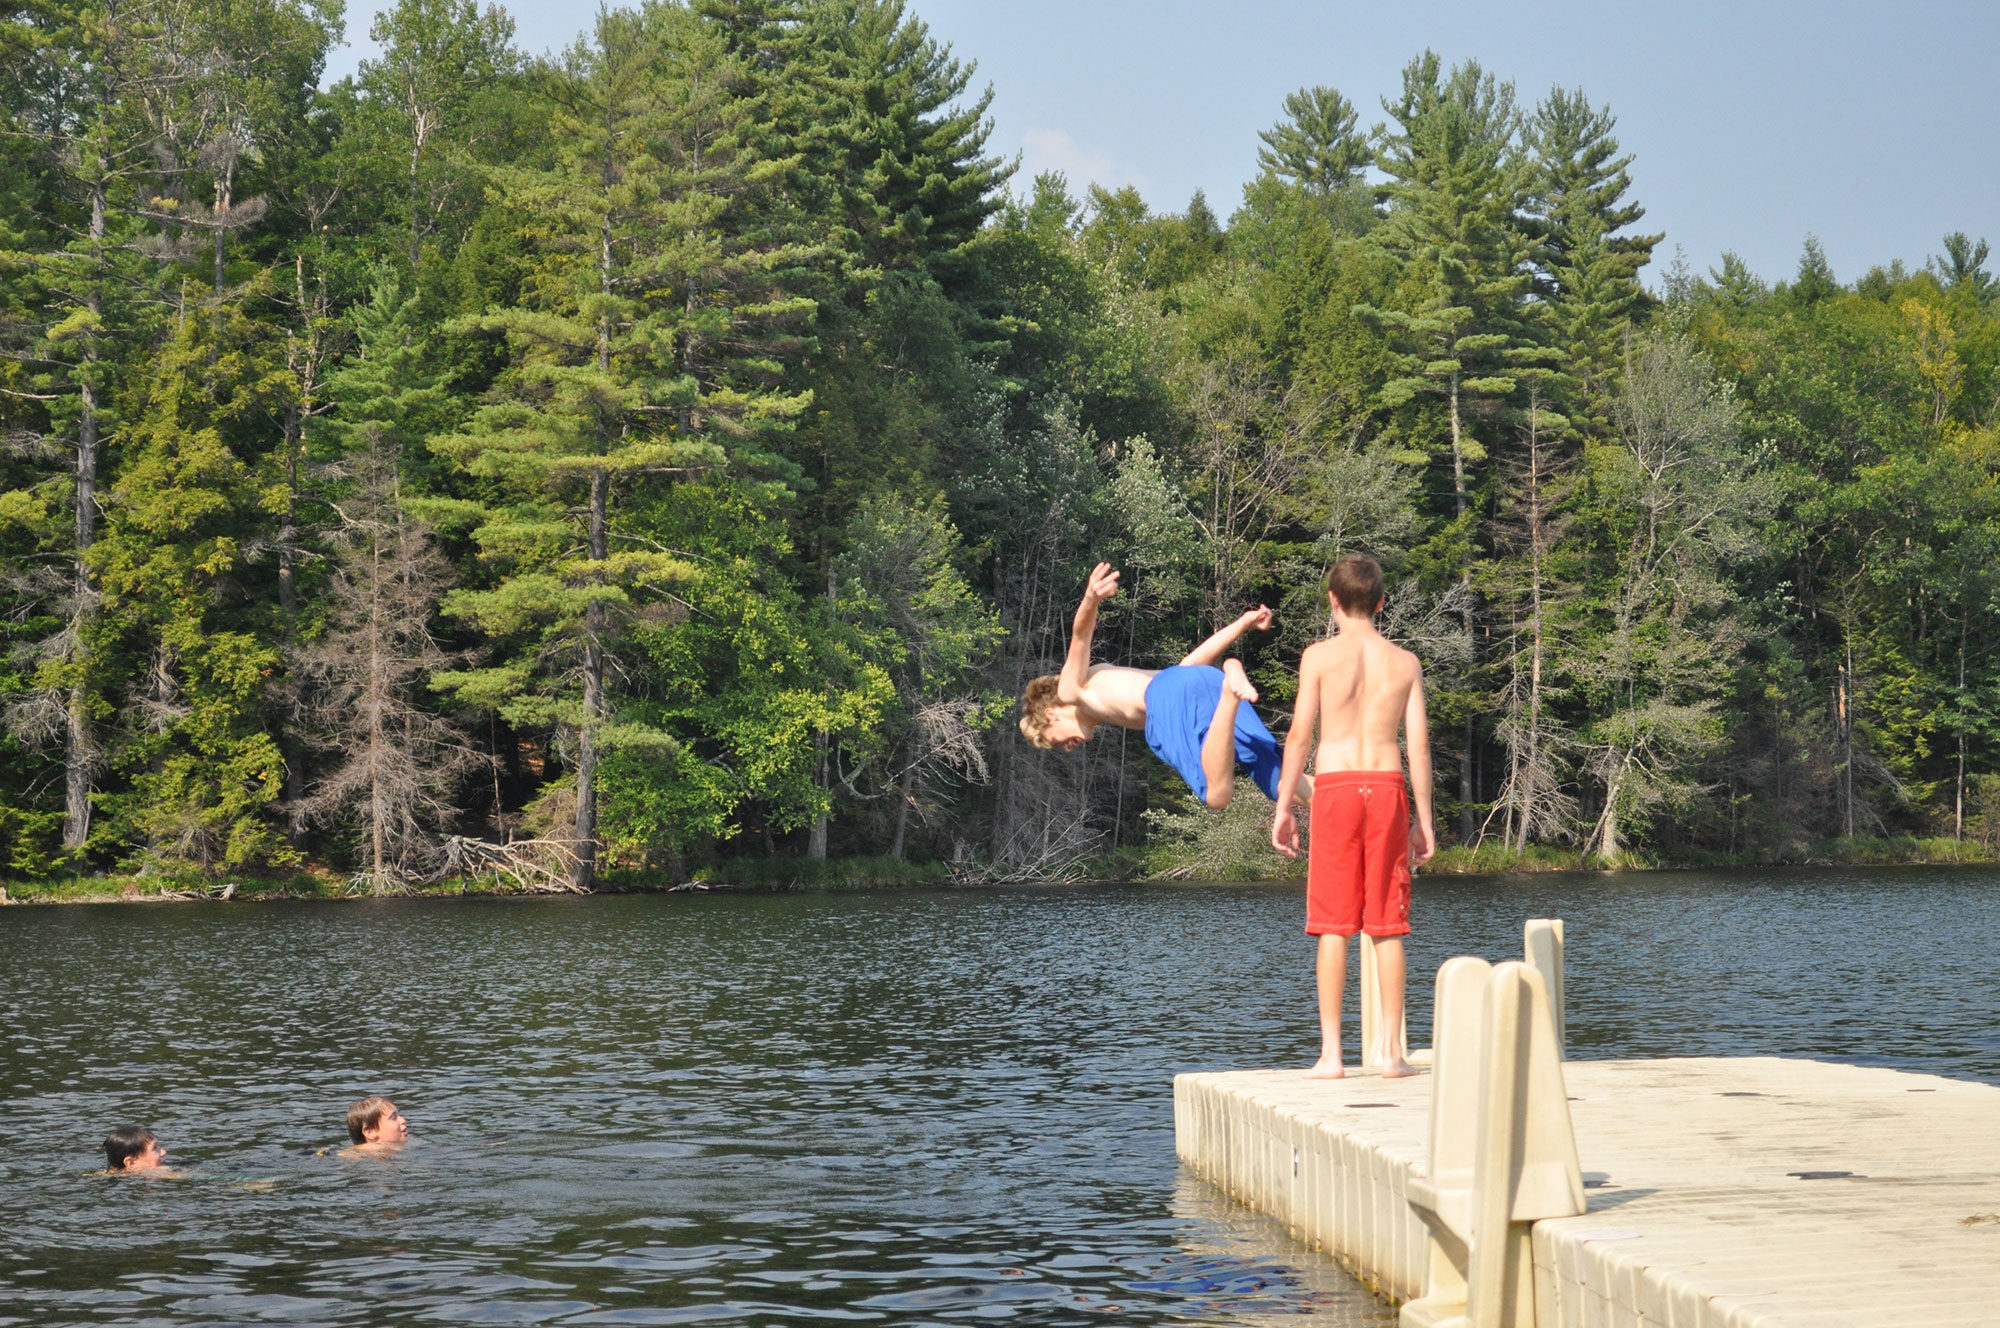 kids jumping off dock into water